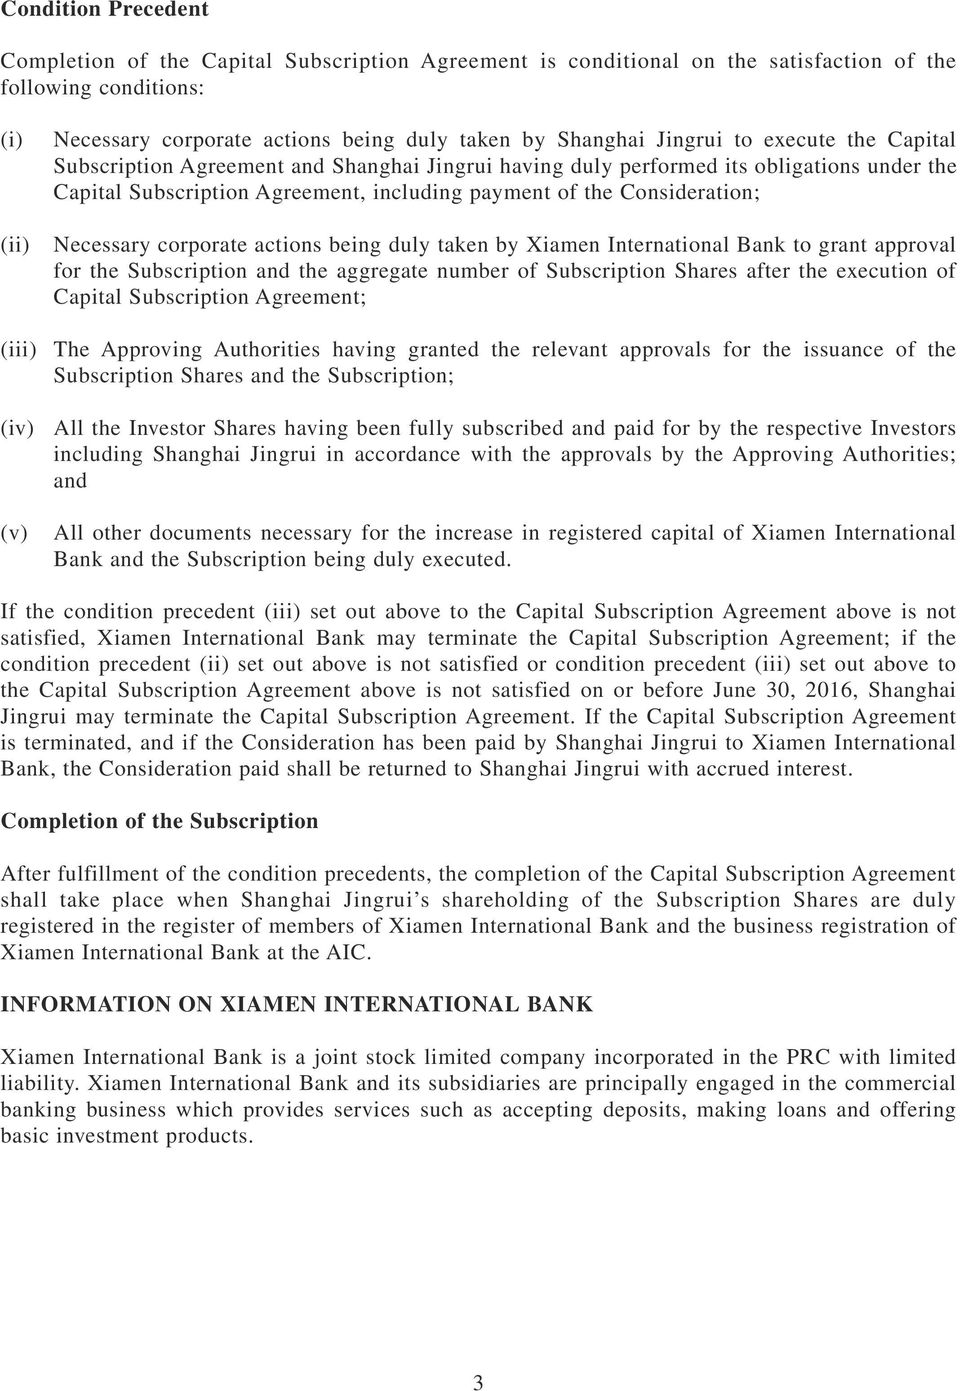 Necessary corporate actions being duly taken by Xiamen International Bank to grant approval for the Subscription and the aggregate number of Subscription Shares after the execution of Capital